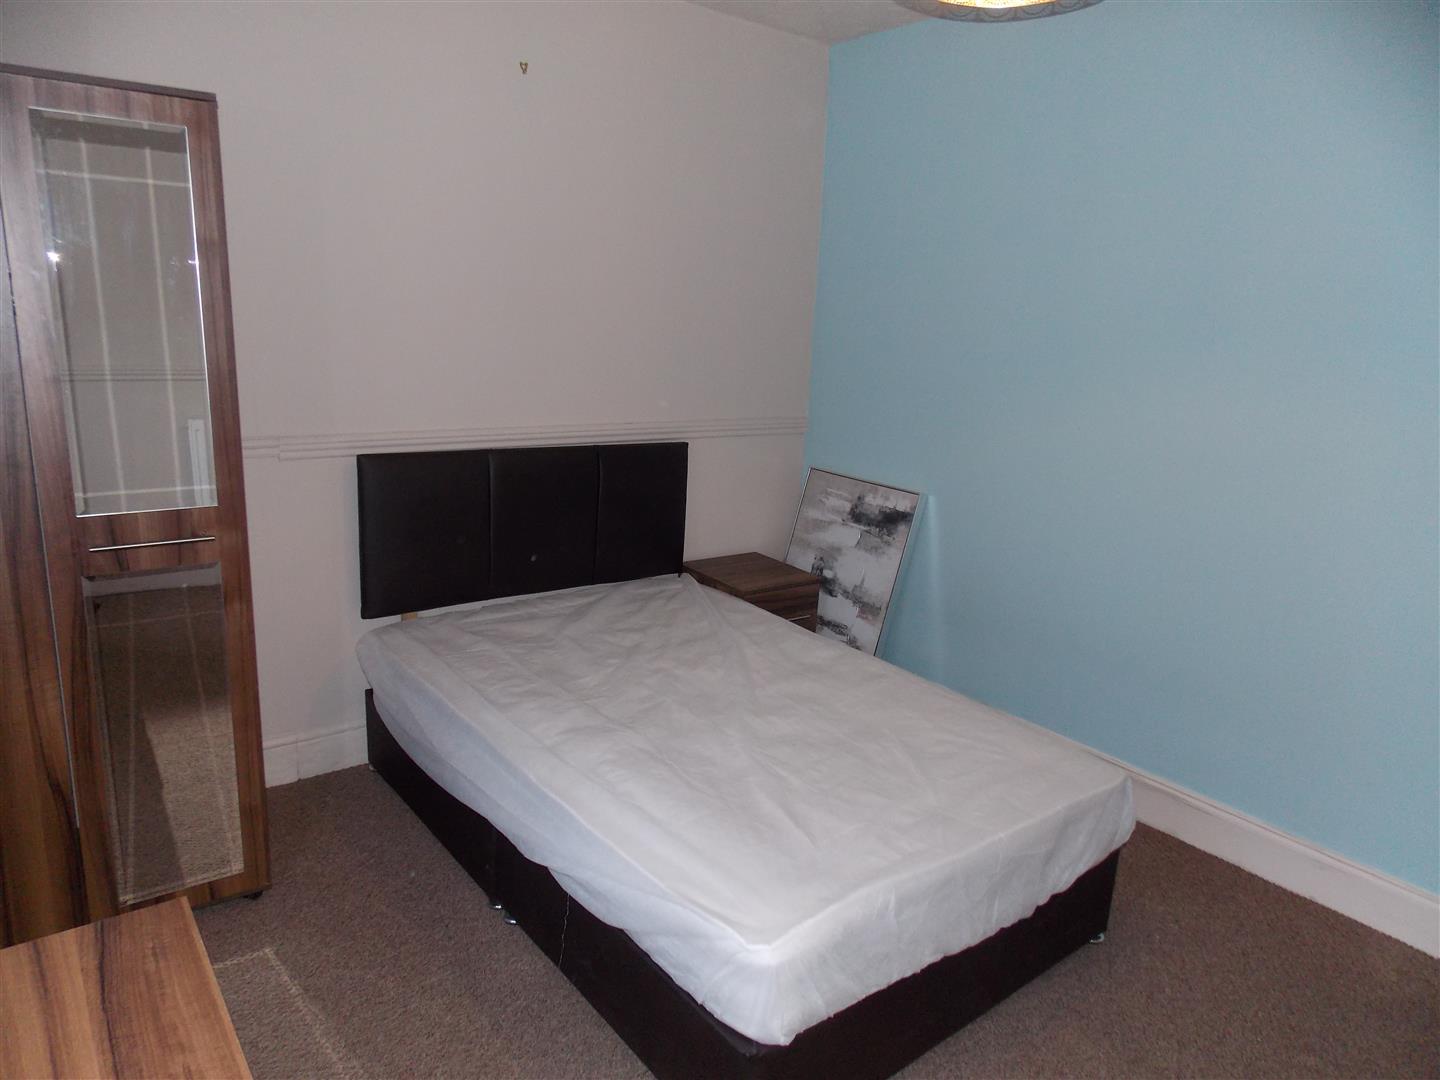 1 bed  to rent  - Property Image 2